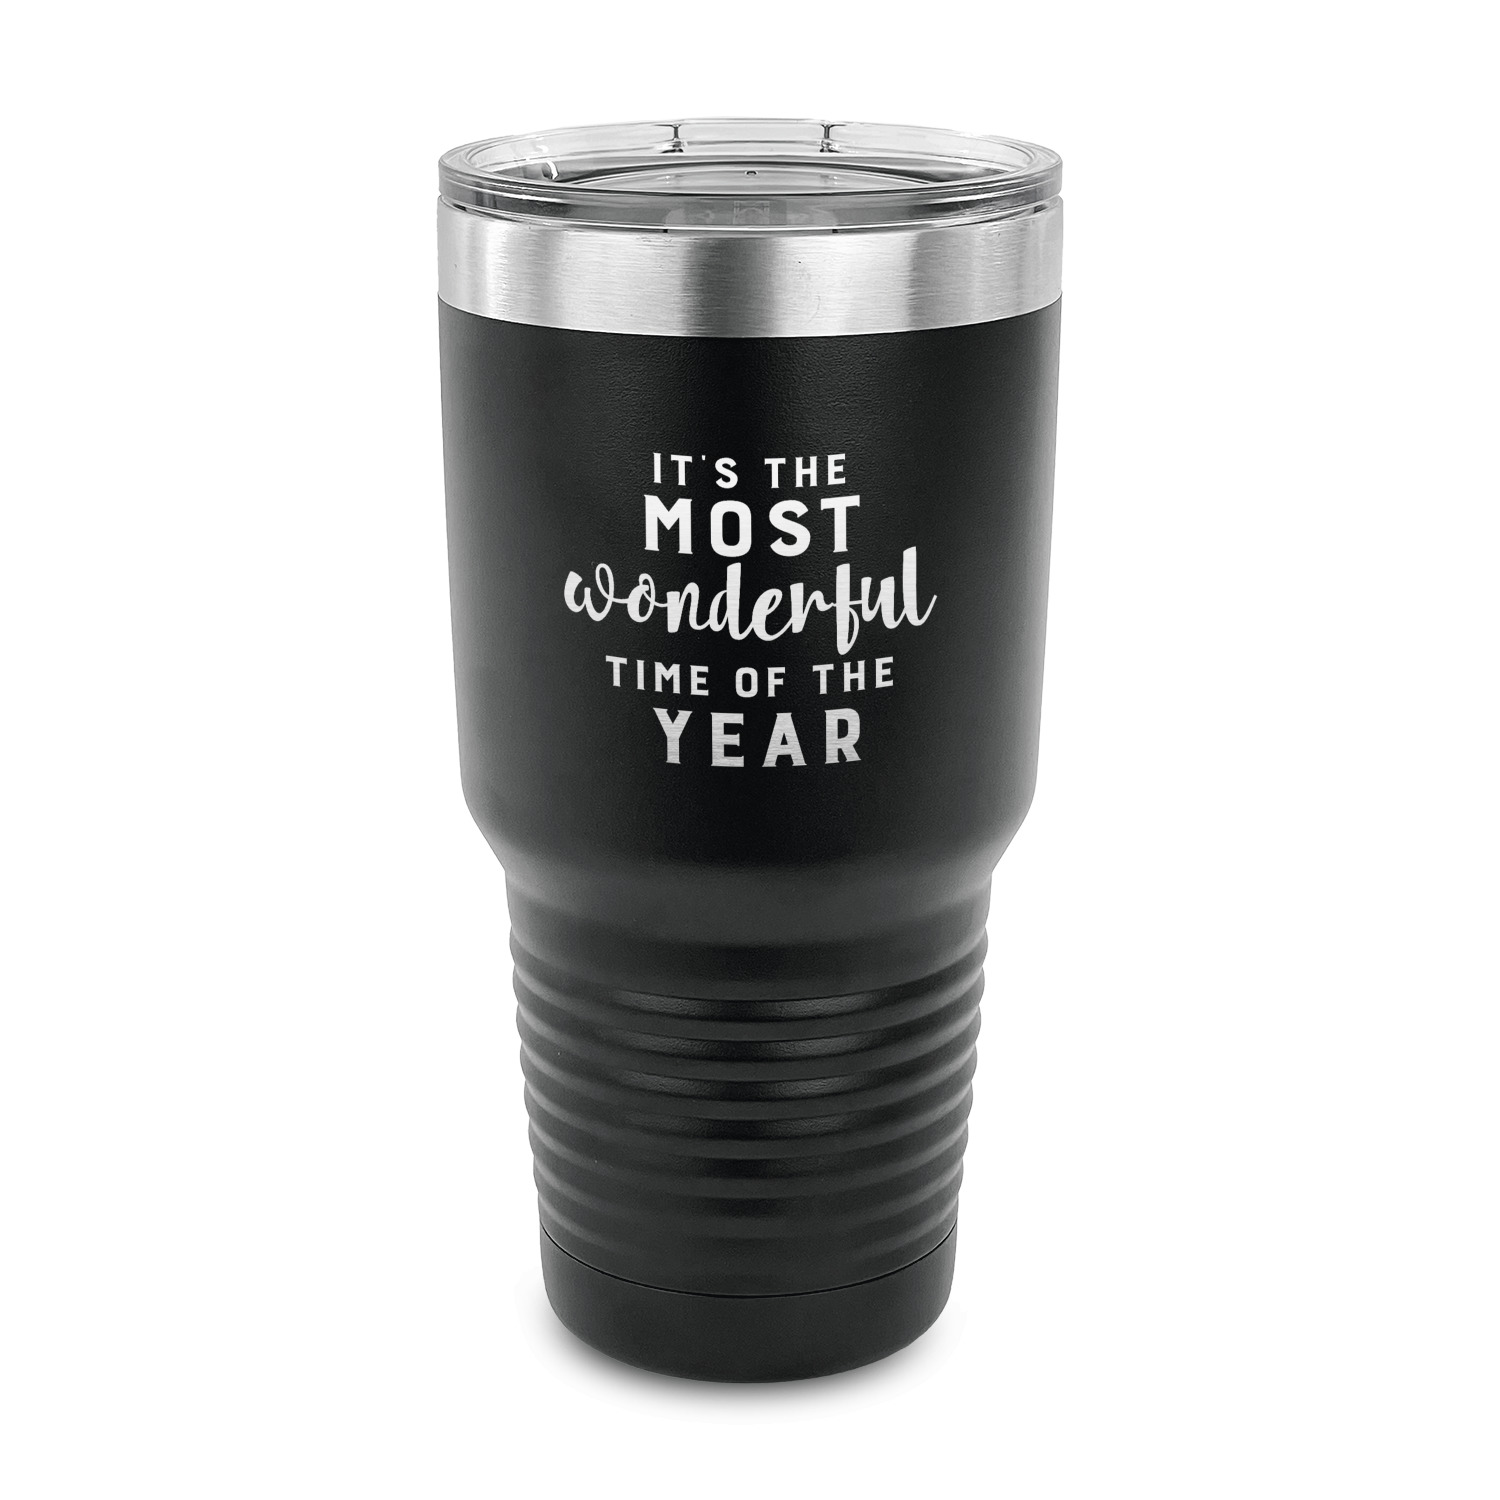 https://www.youcustomizeit.com/common/MAKE/1038049/Christmas-Quotes-and-Sayings-30-oz-Stainless-Steel-Ringneck-Tumblers-Black-FRONT.jpg?lm=1655154413